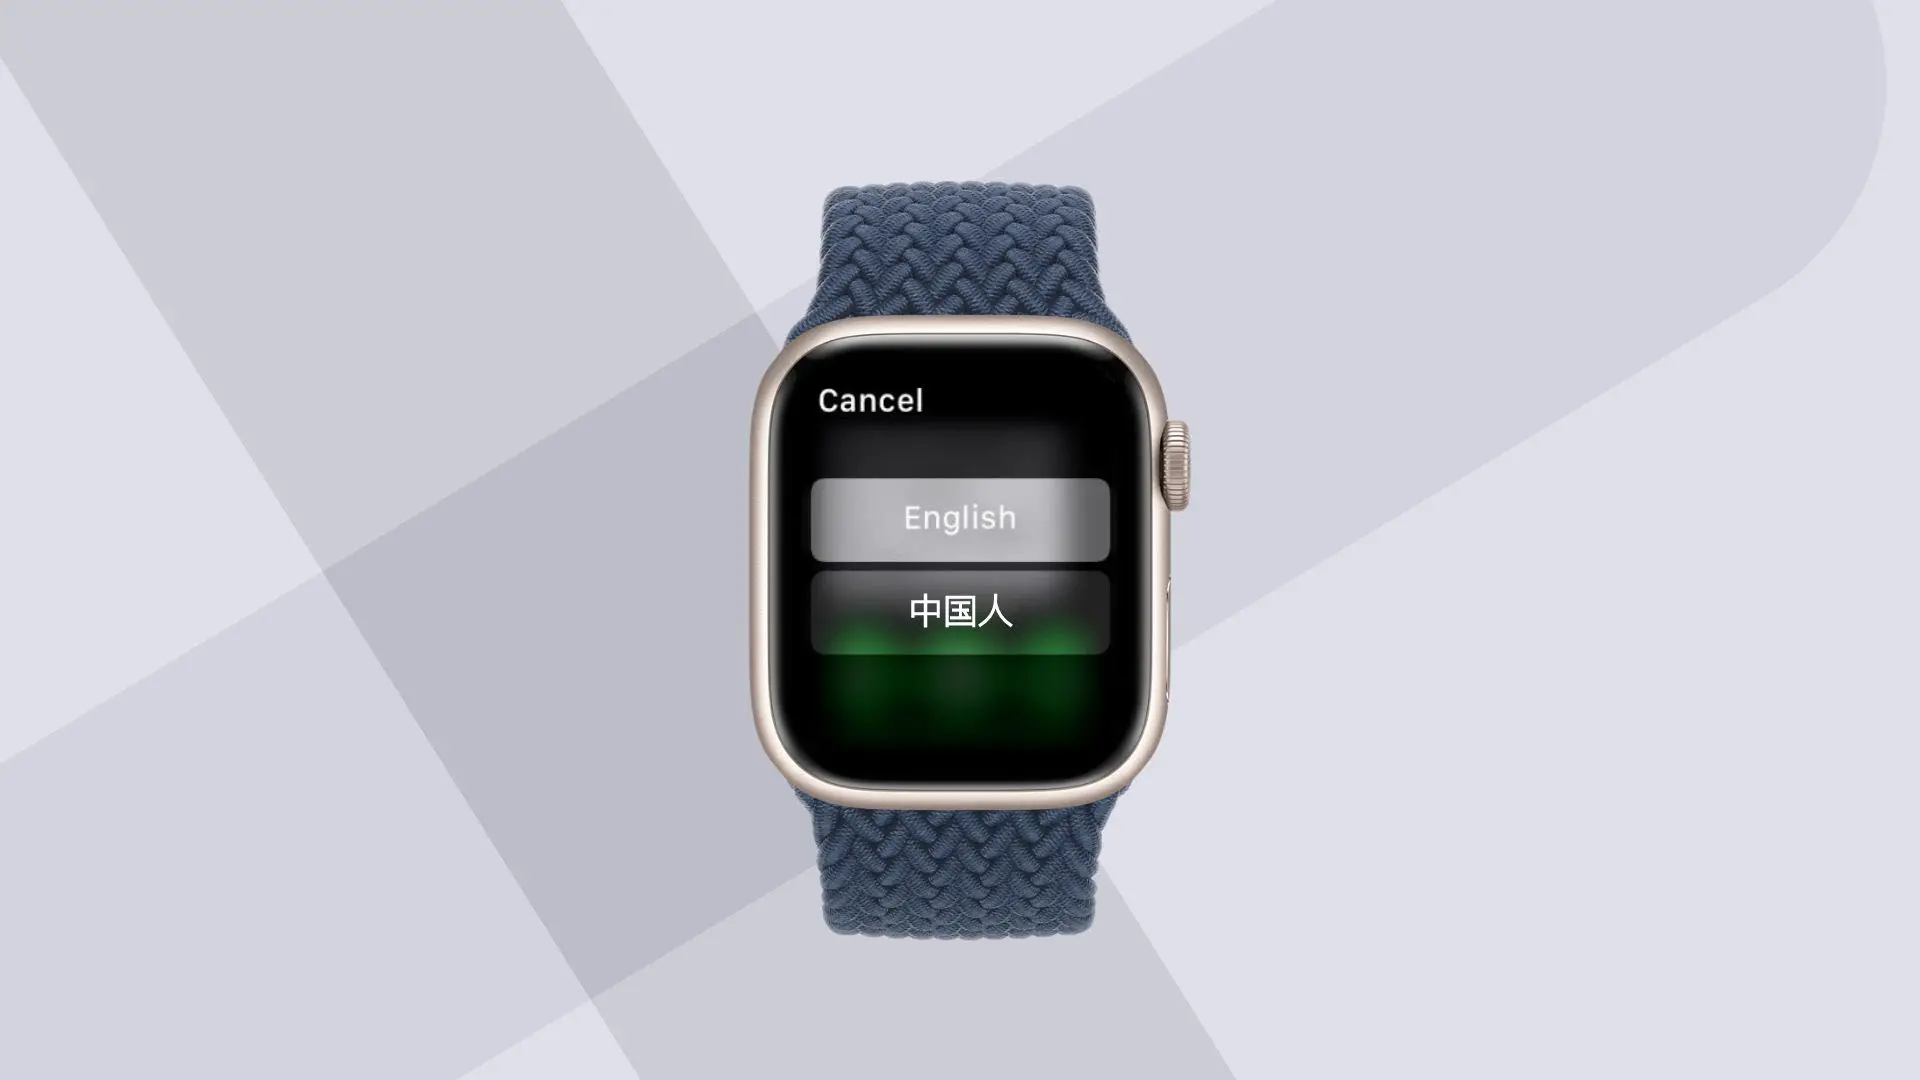 Showing Apple watch with Chinese text